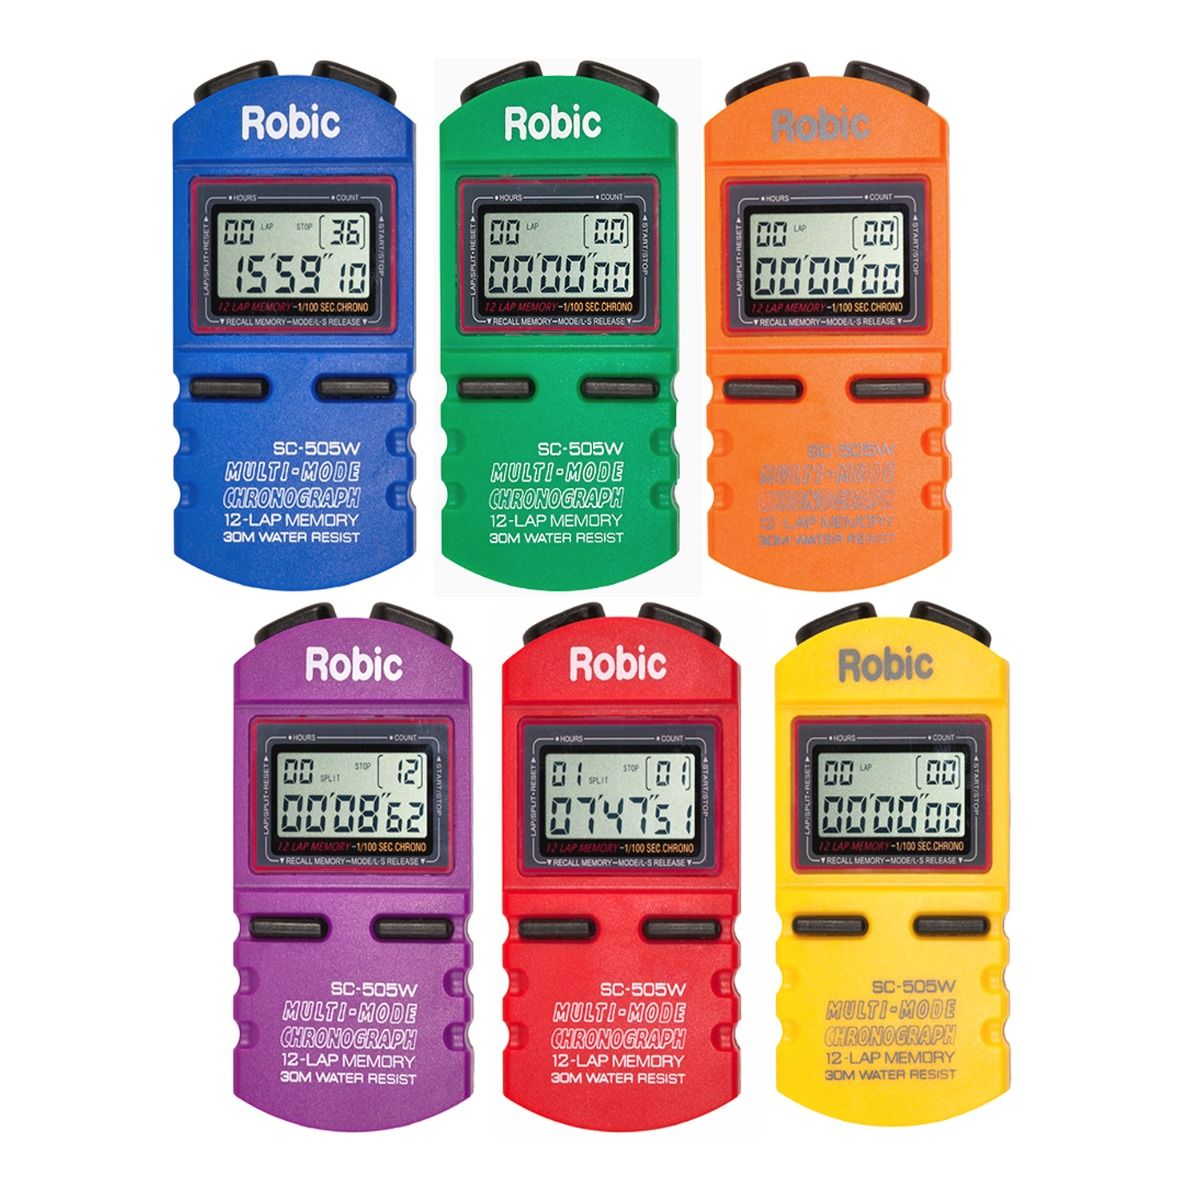 Gill Athletics Robic SC-505W Stopwatches - Set of 6